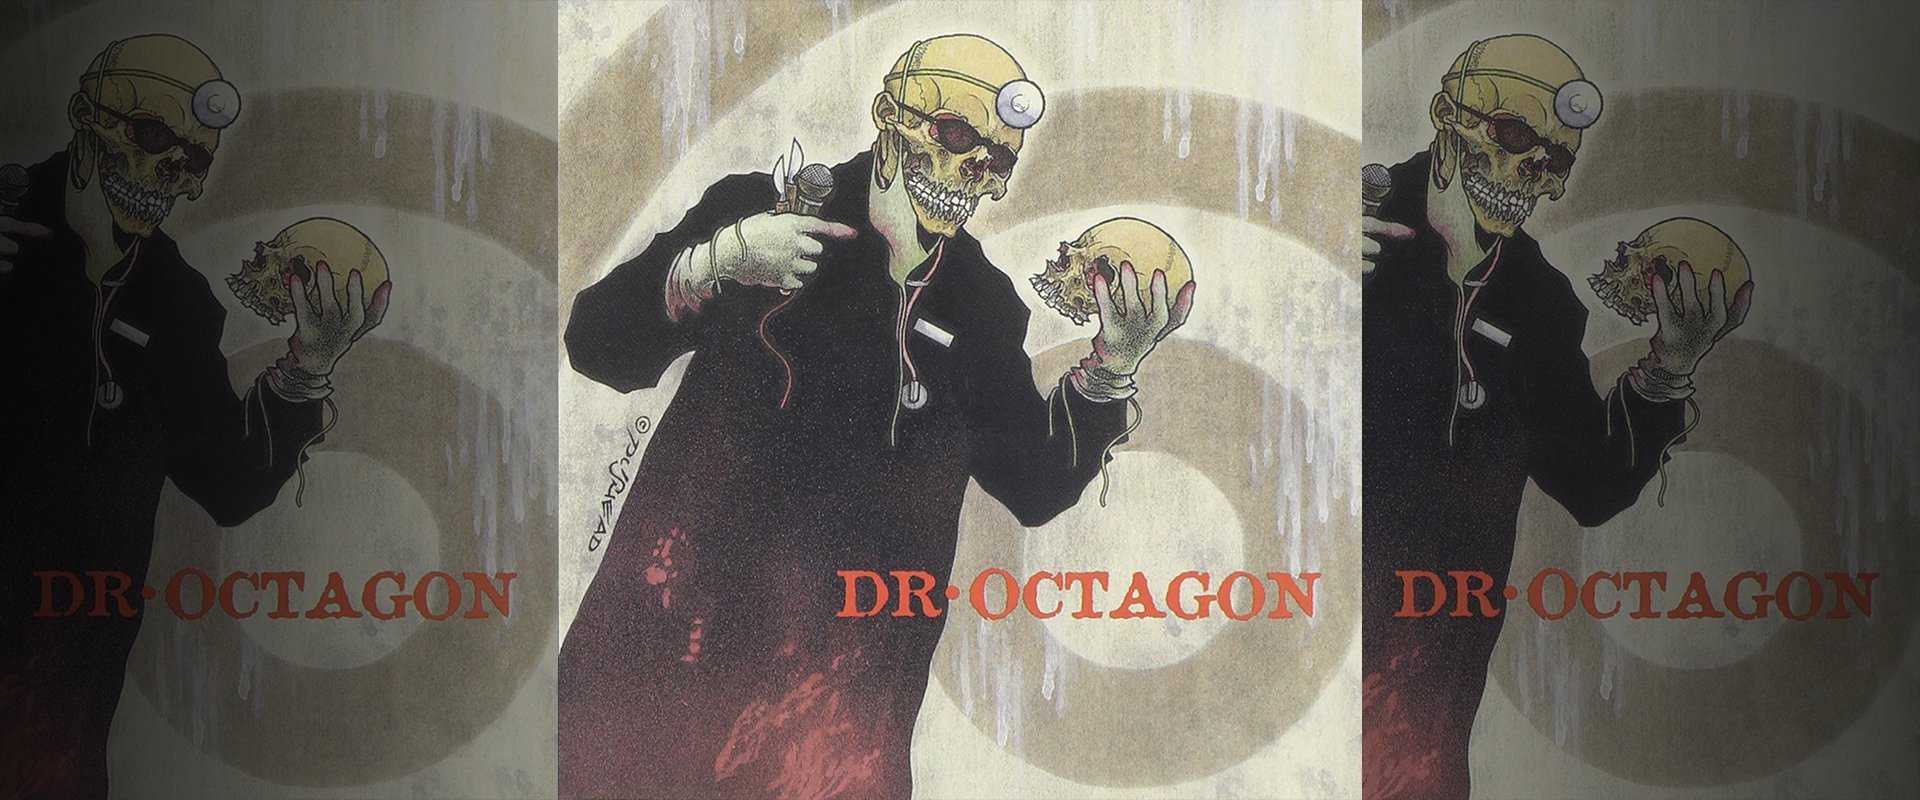 Classic Albums: 'Dr. Octagonecologyst' by Dr. Octagon